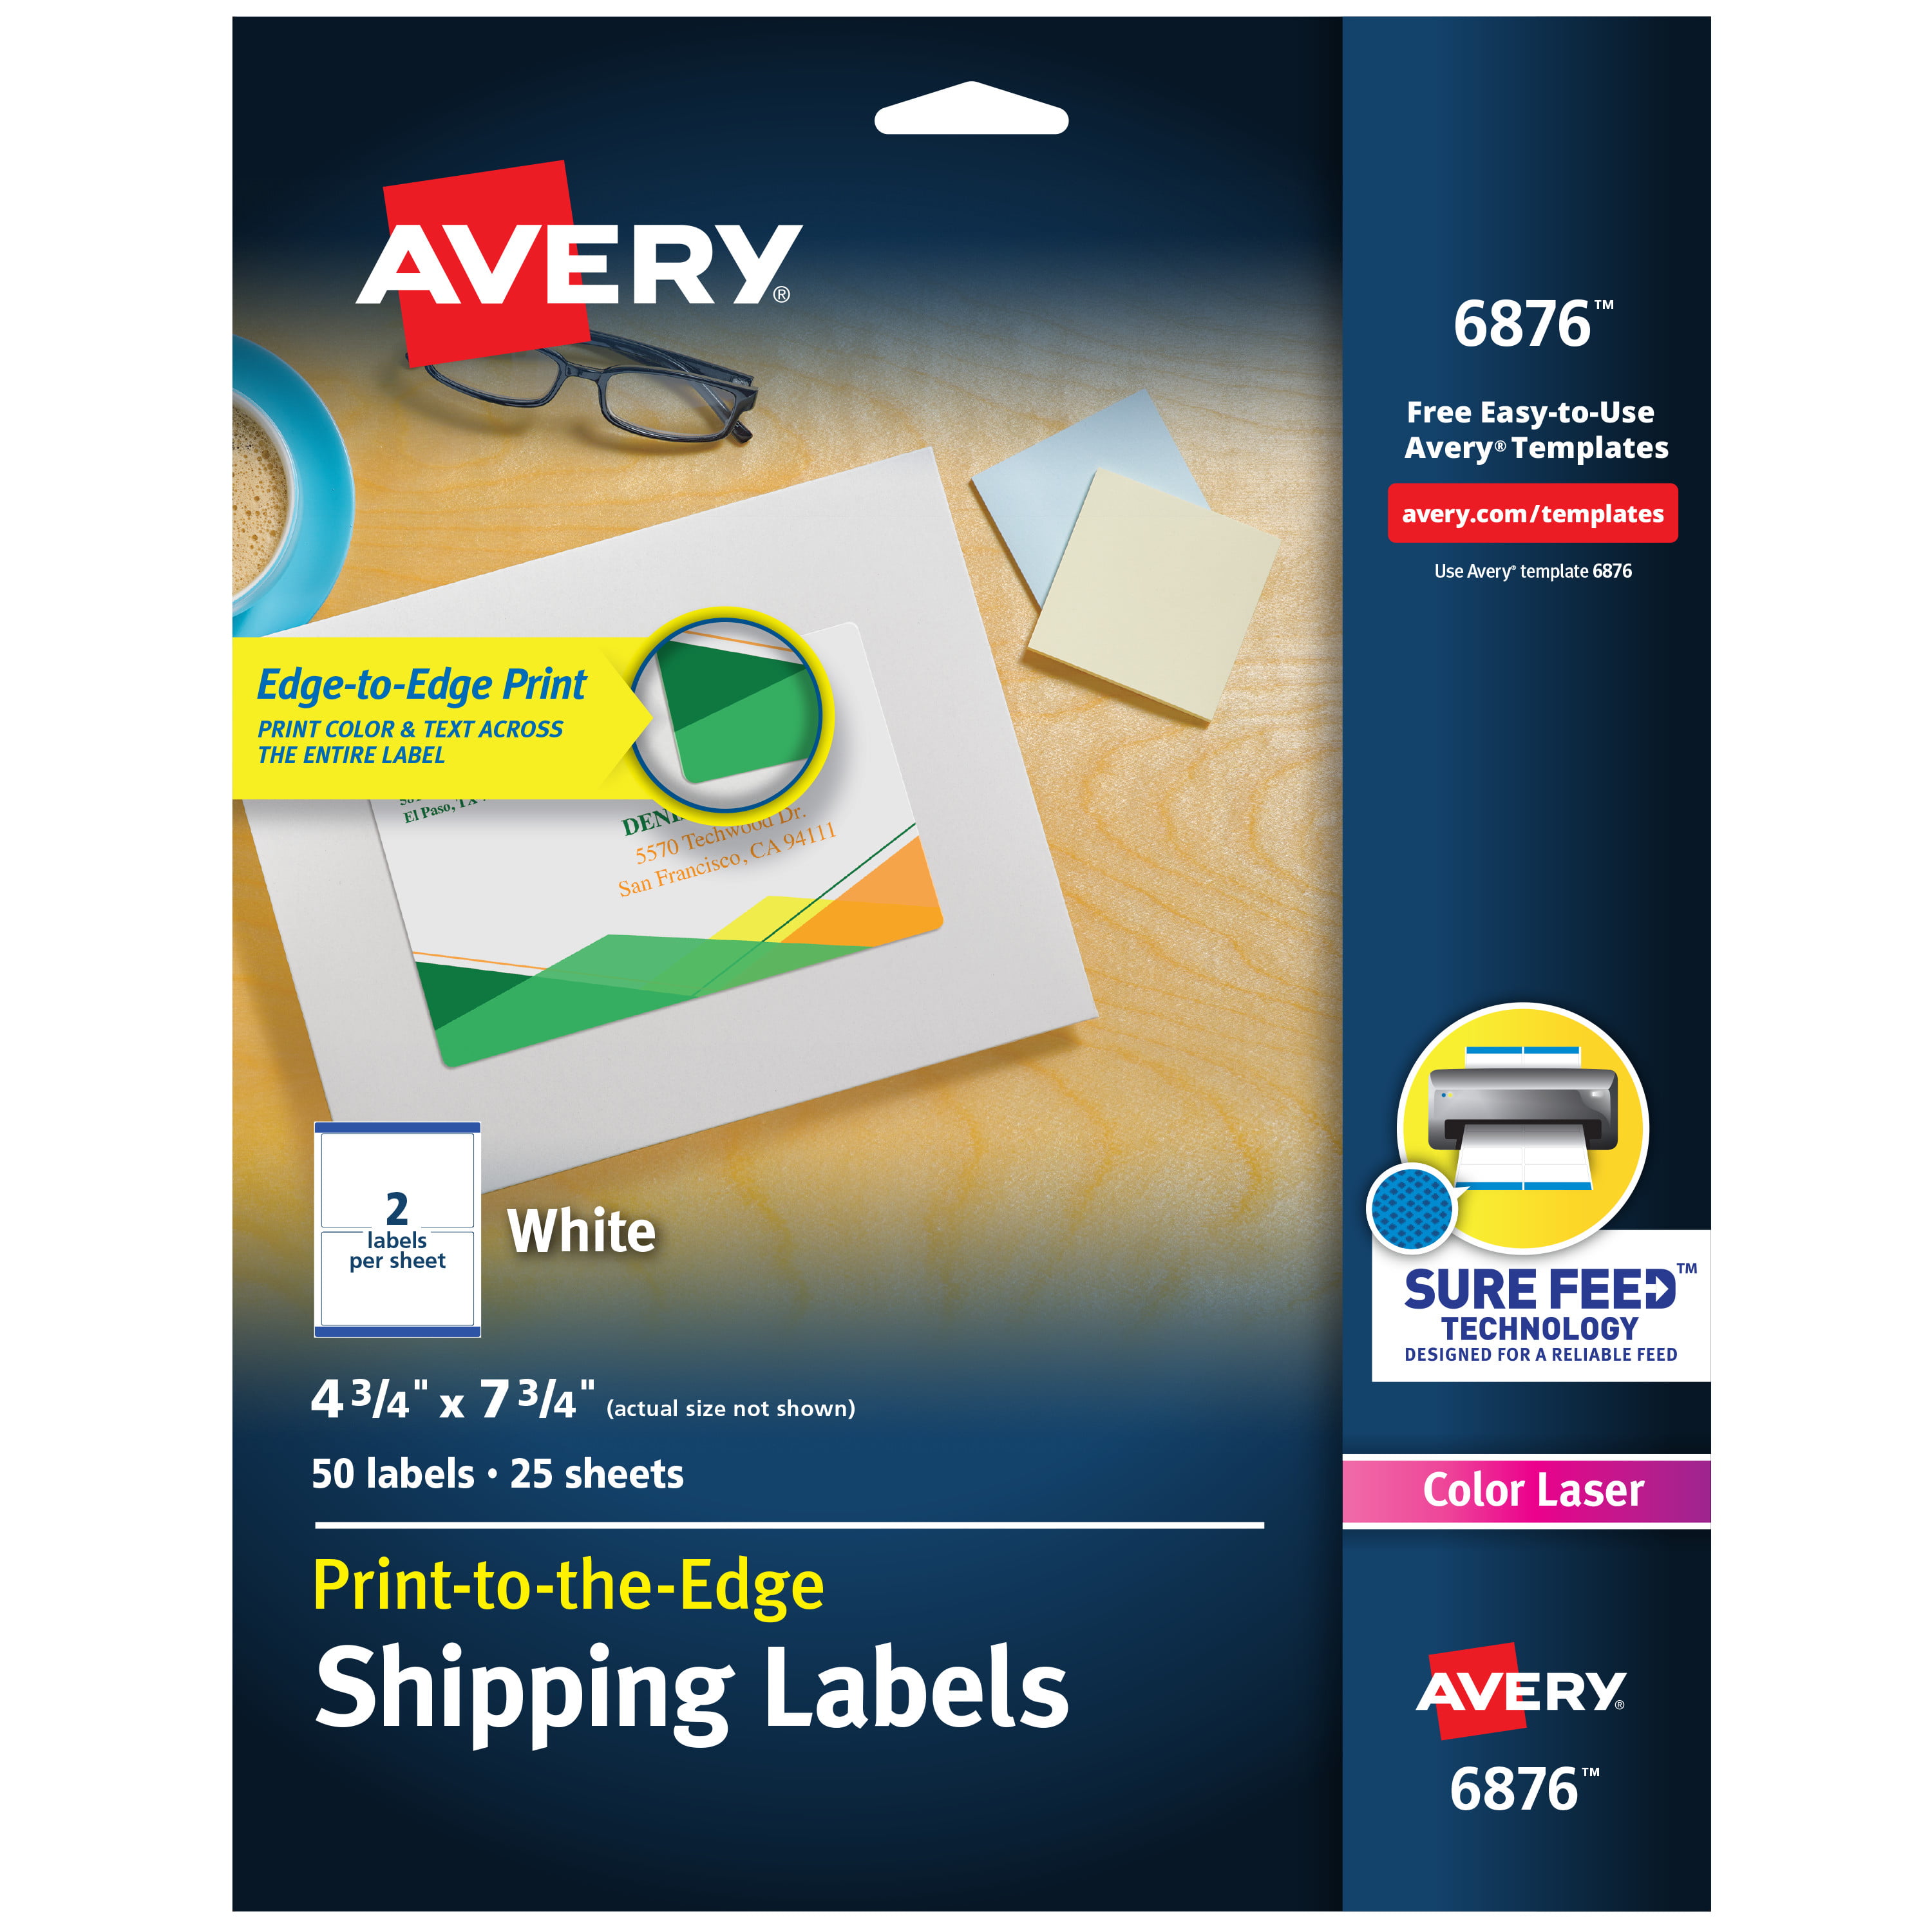 Avery White Marking Tags Strung 2 X 1 Inches 1000 Old Stock Unopened for sale online 